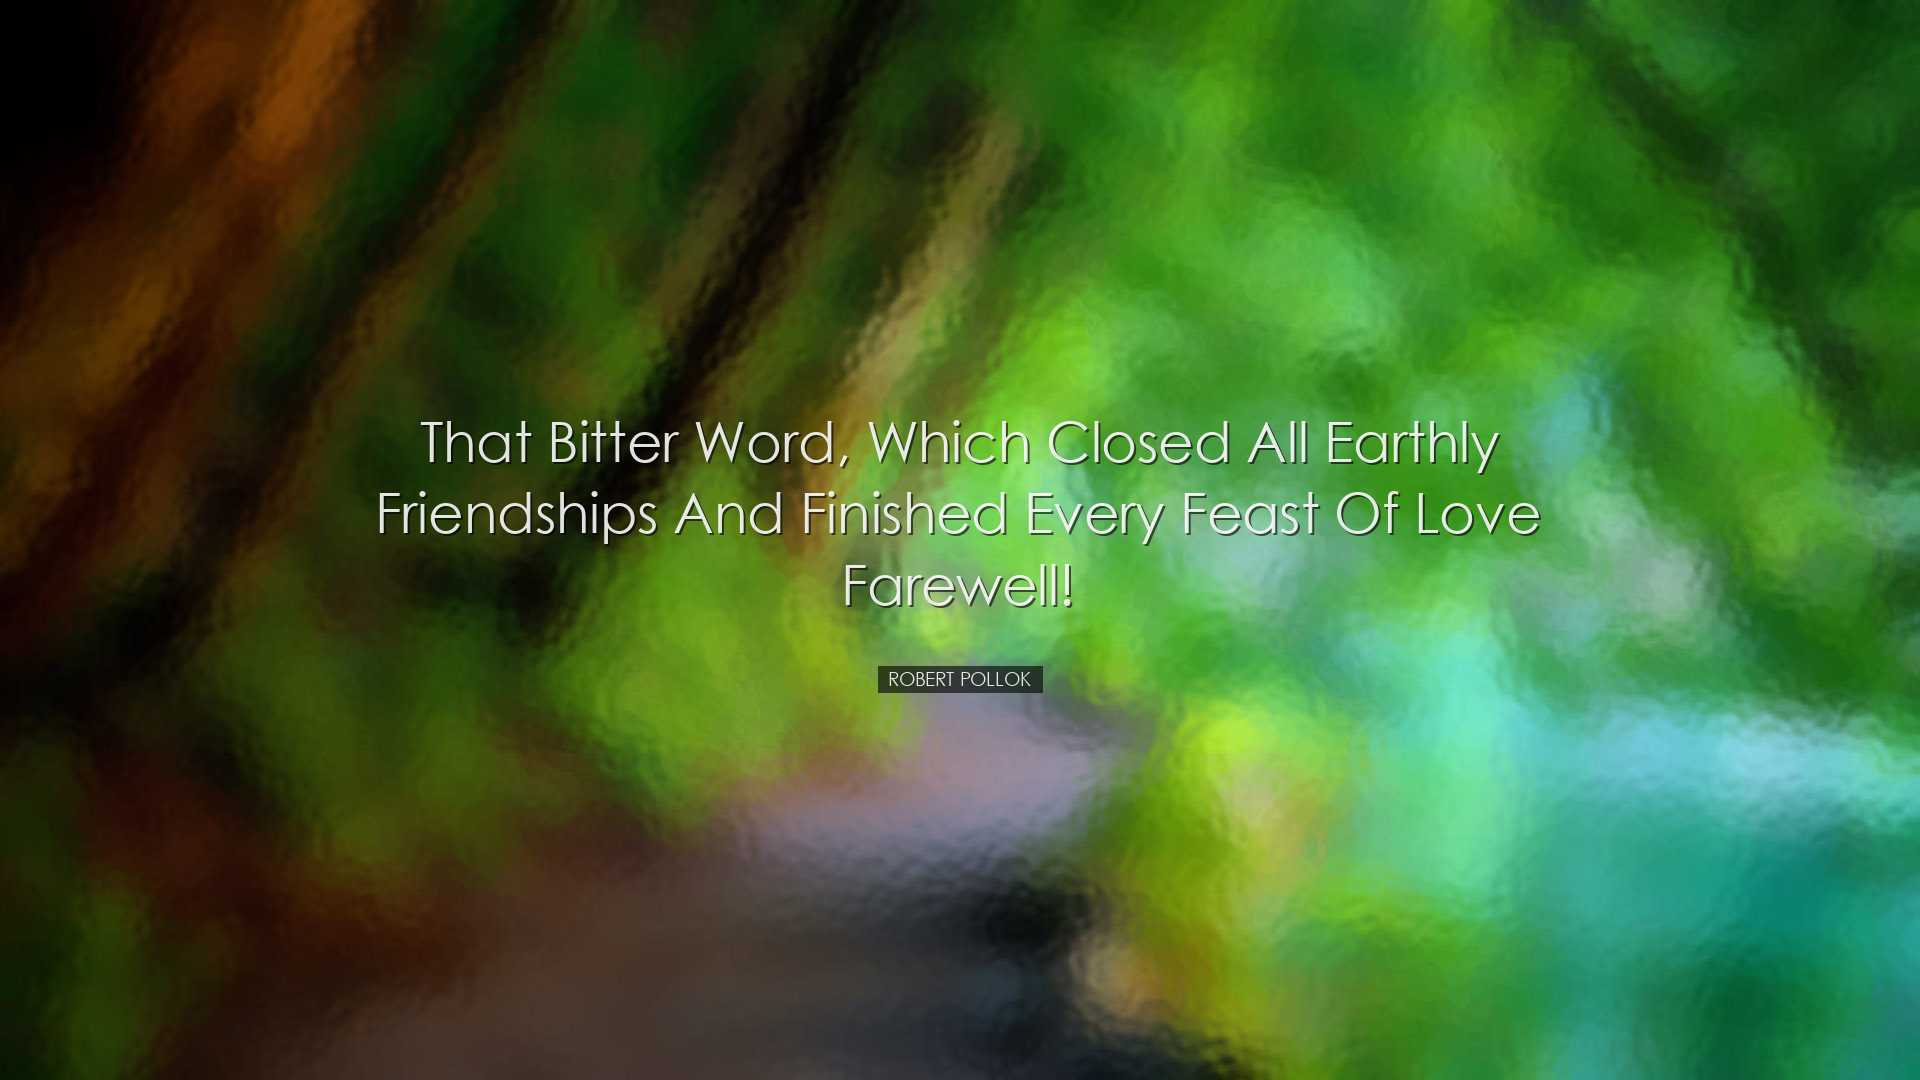 That bitter word, which closed all earthly friendships and finishe